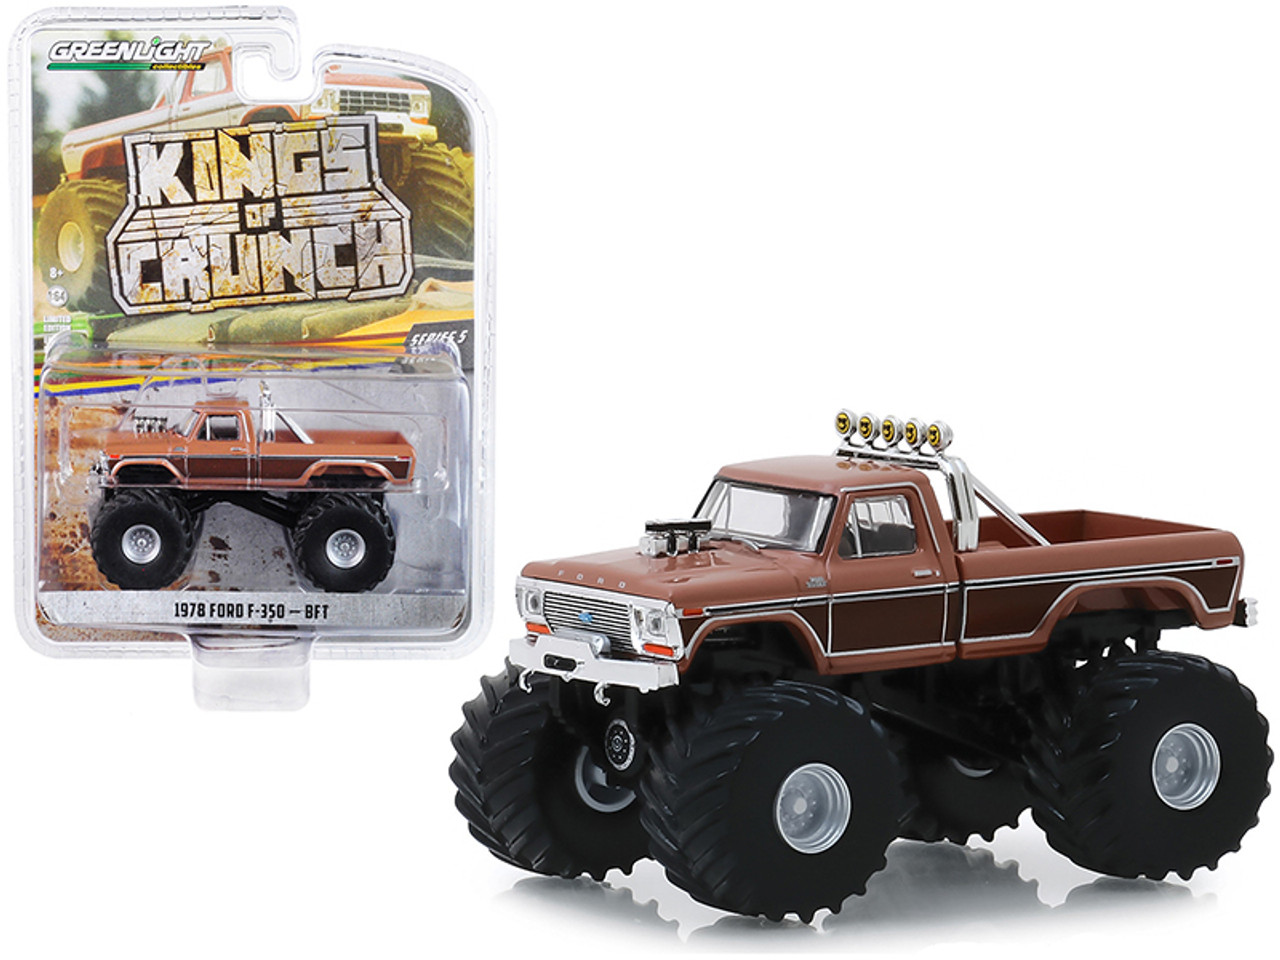 1/64 Greenlight 1978 Ford F-350 Monster Truck "BFT" Brown "Kings of Crunch" Series 5 Diecast Car Model